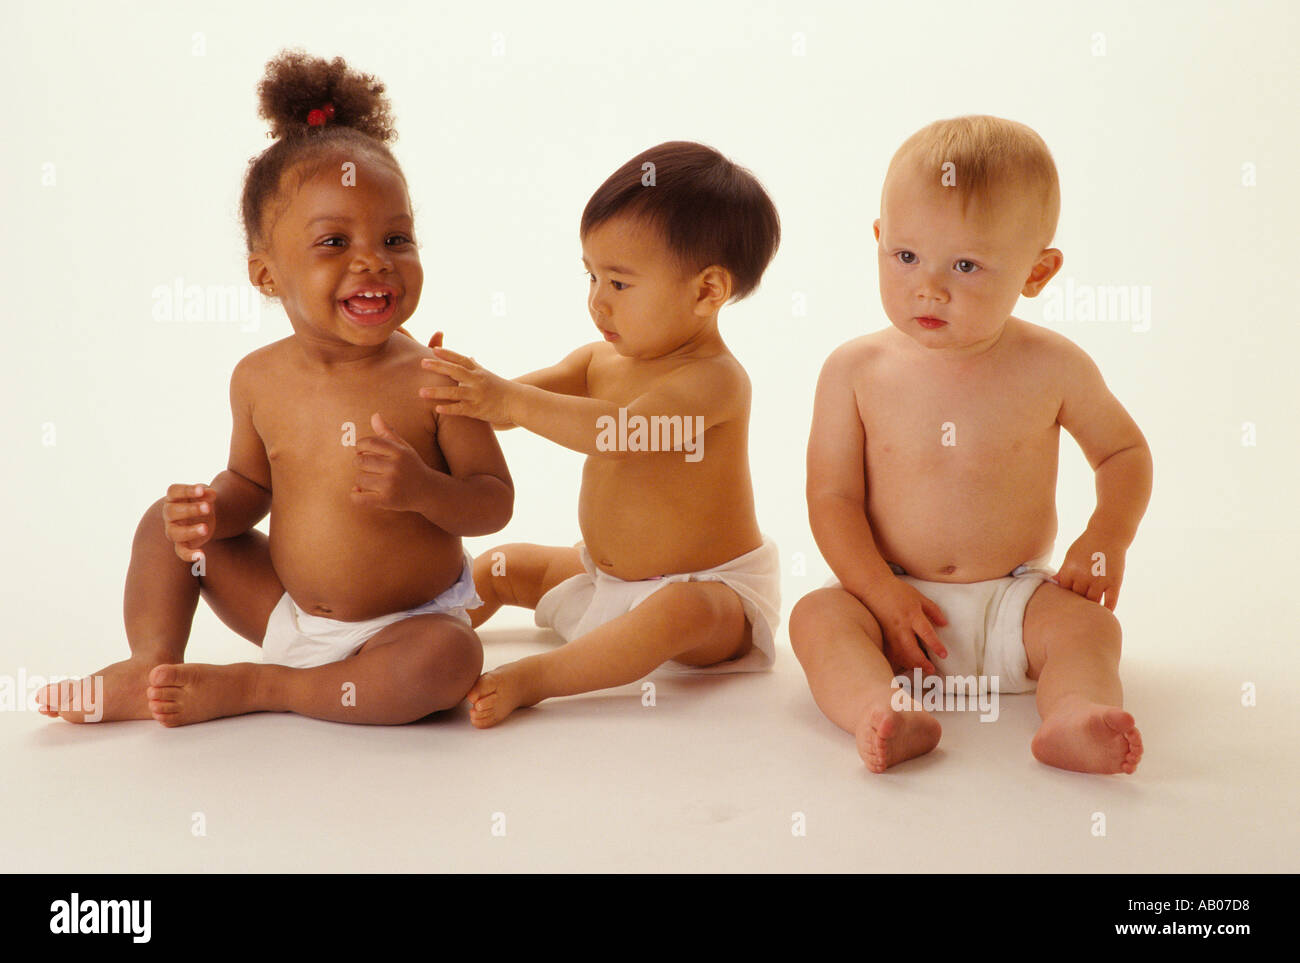 Three babies one black one white one Asian sit together in a ...